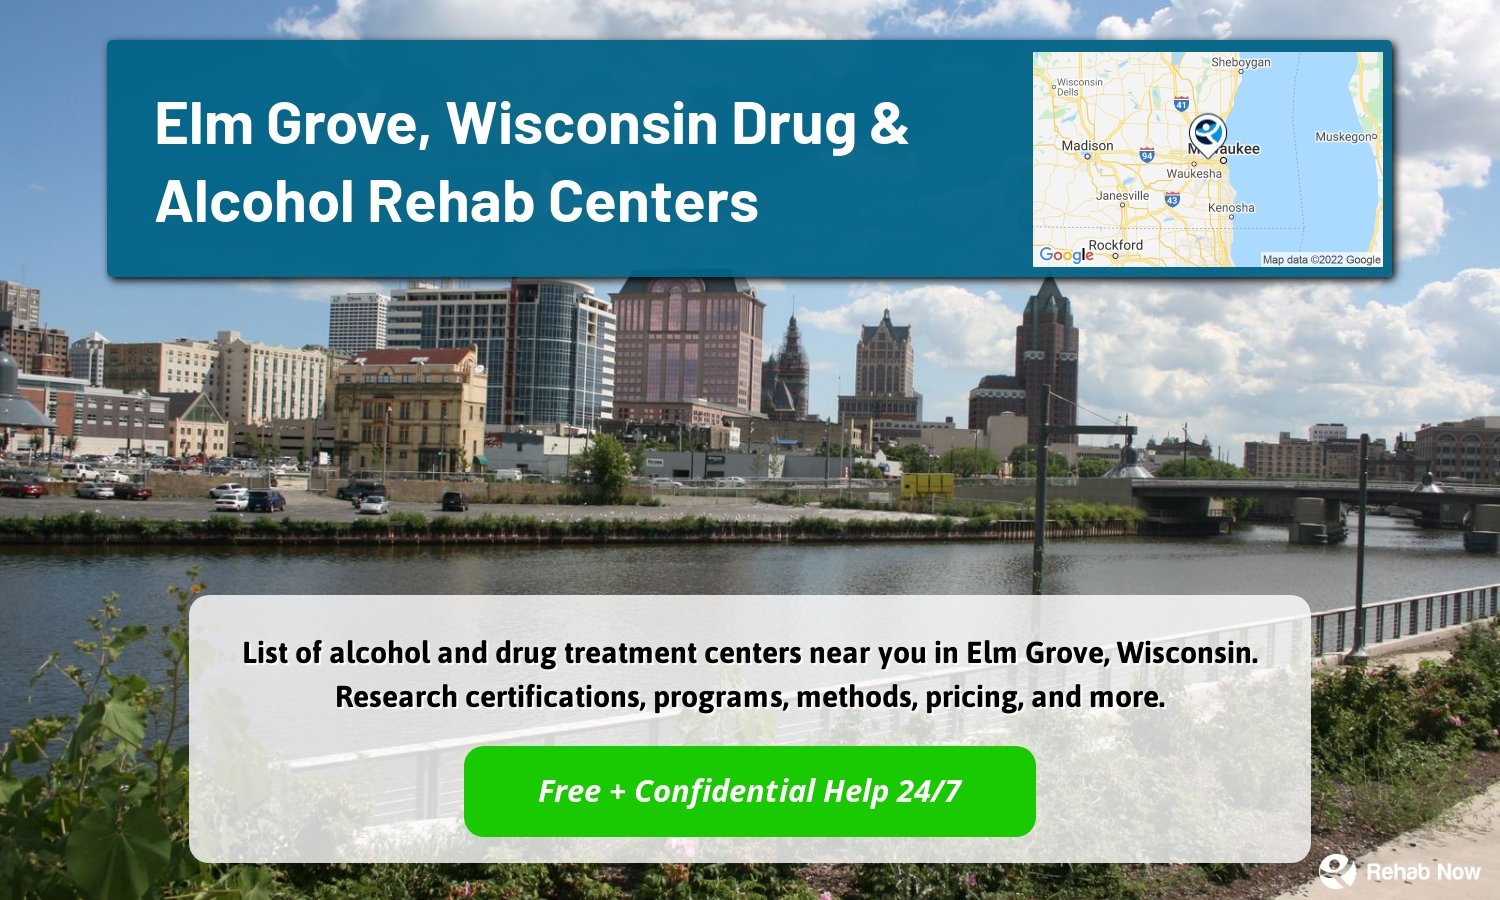 List of alcohol and drug treatment centers near you in Elm Grove, Wisconsin. Research certifications, programs, methods, pricing, and more.